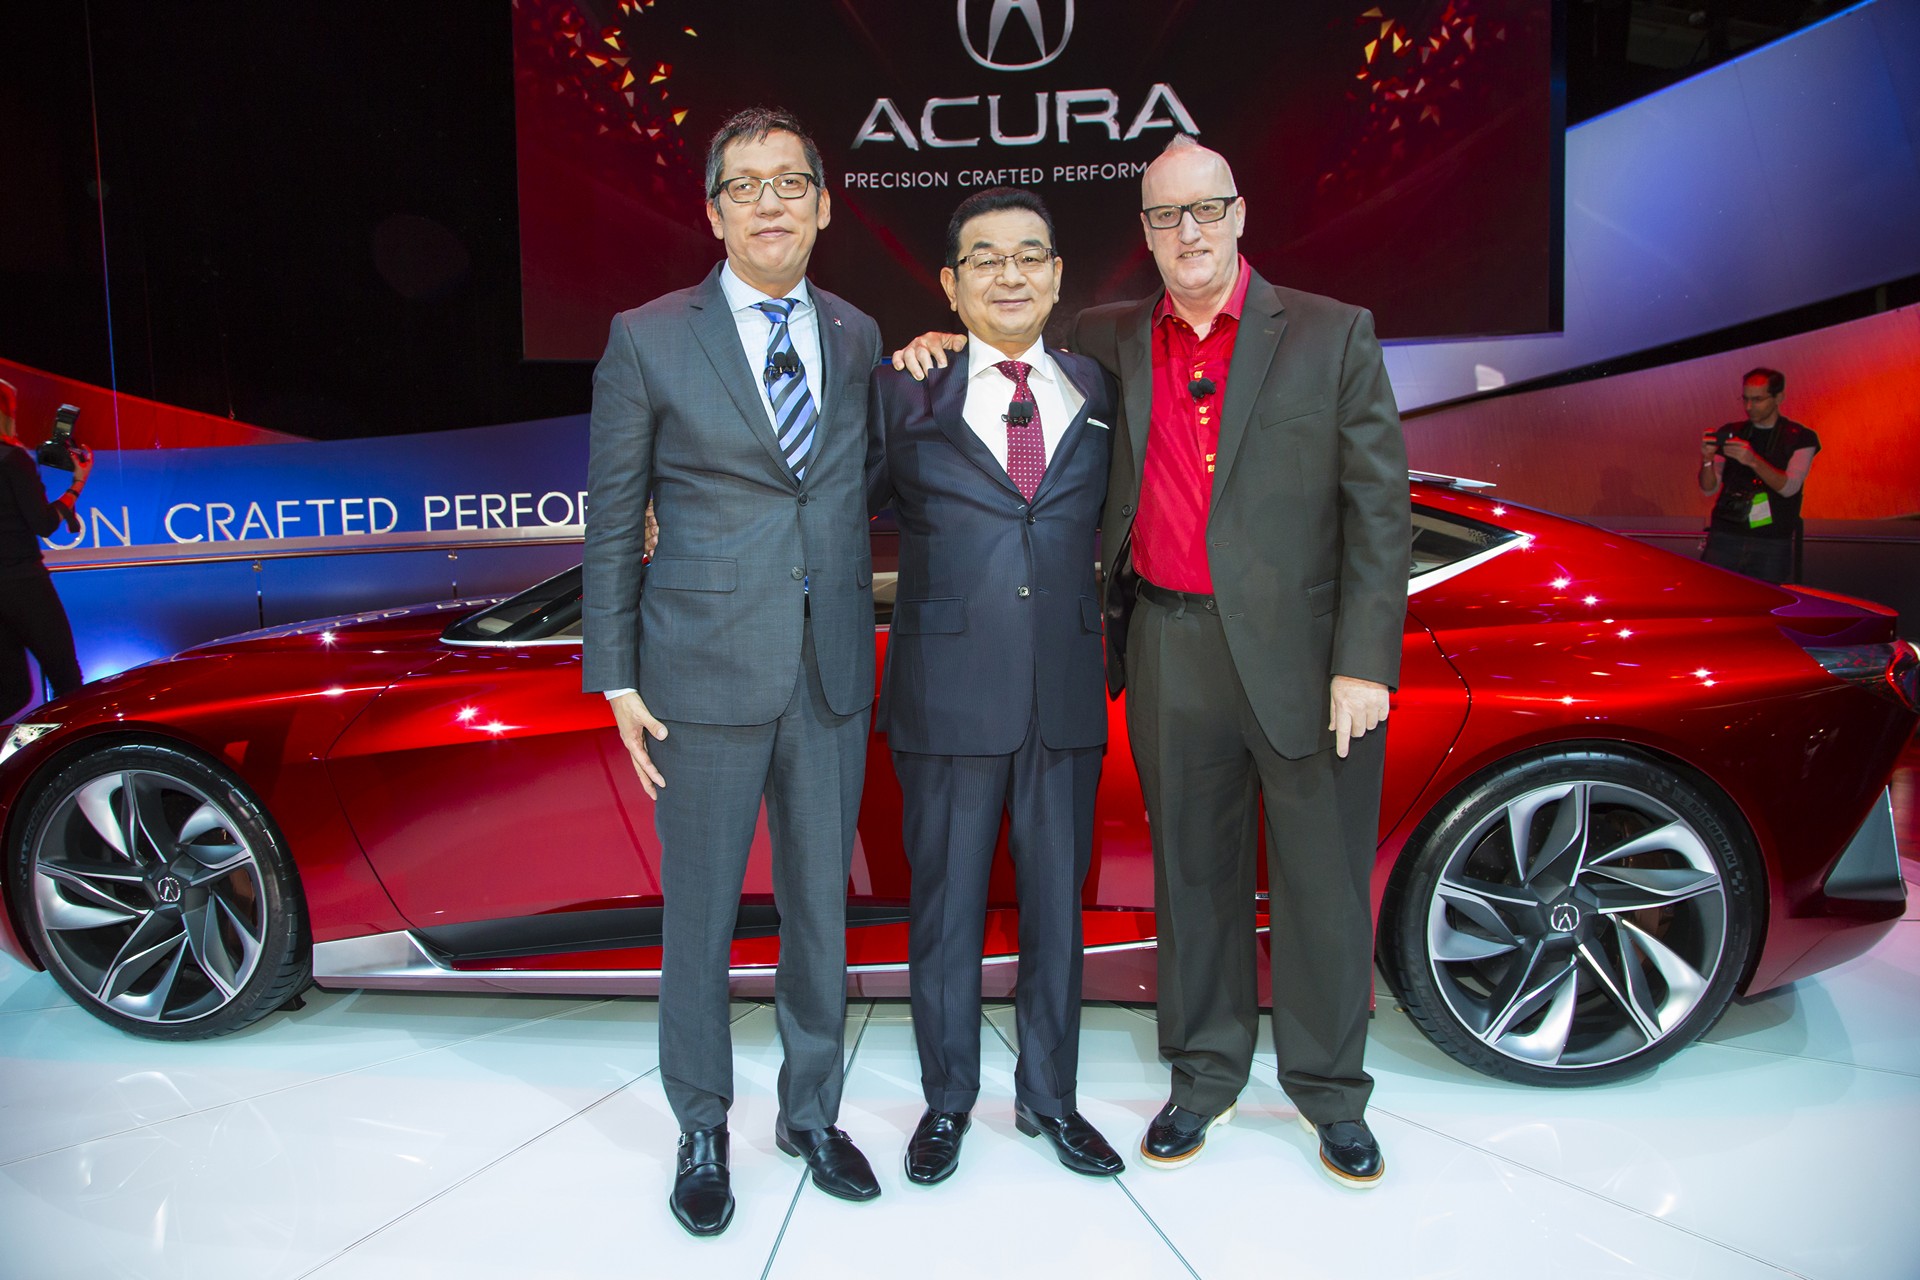 From left to right, Jon Ikeda, Vice President and General Manager, Acura Division, Takahiro Hachigo, President and CEO of Honda Motor Co., Ltd. and Dave Marek, Acura Global Creative Director, at the 2016 North American International Auto Show unveiling of the Acura Precision Concept in Detroit © Honda Motor Co. Ltd.